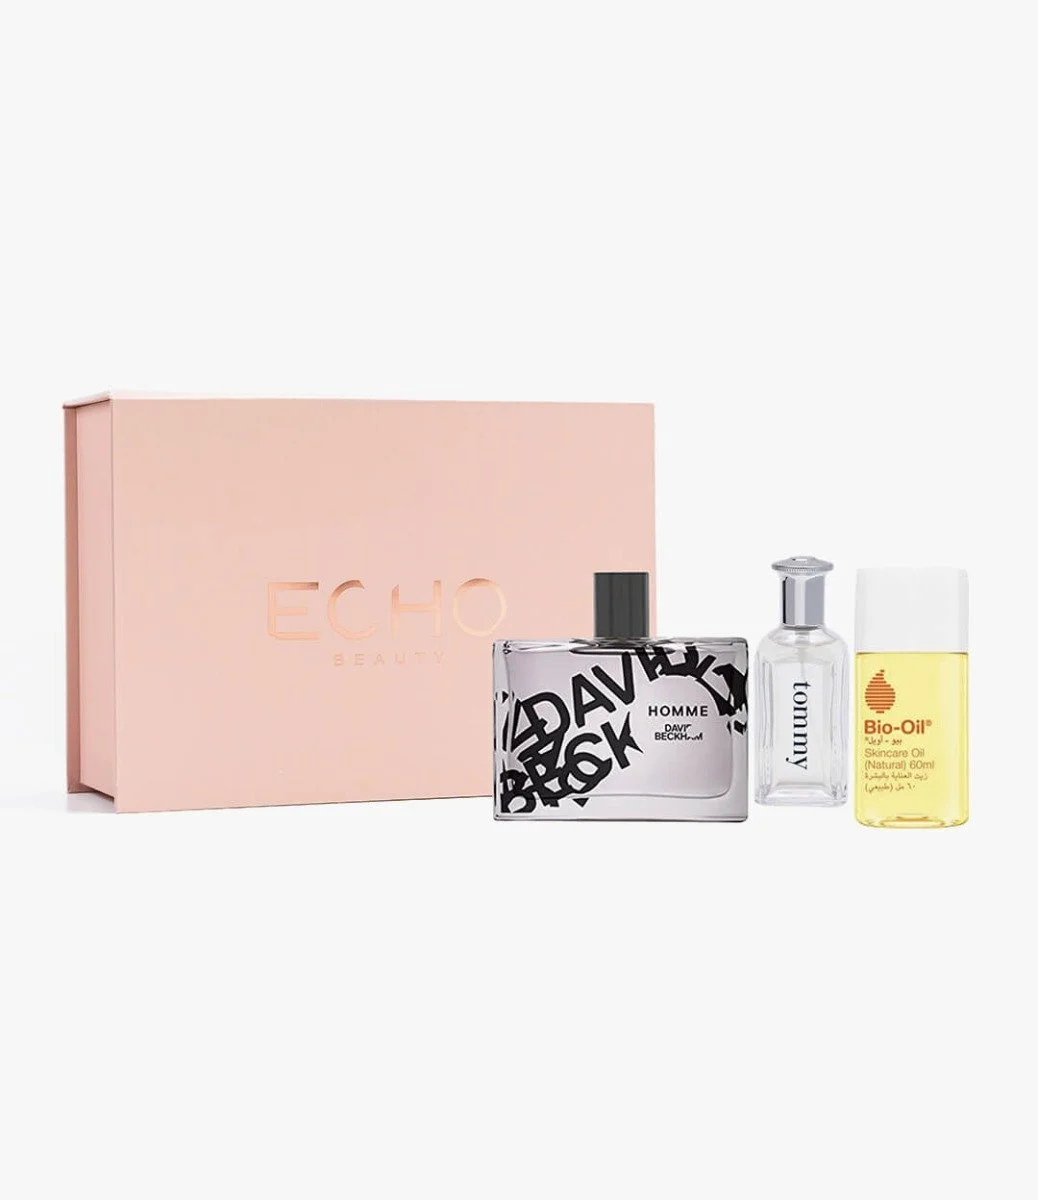 For Men Gift Box 2 by Echo Beauty